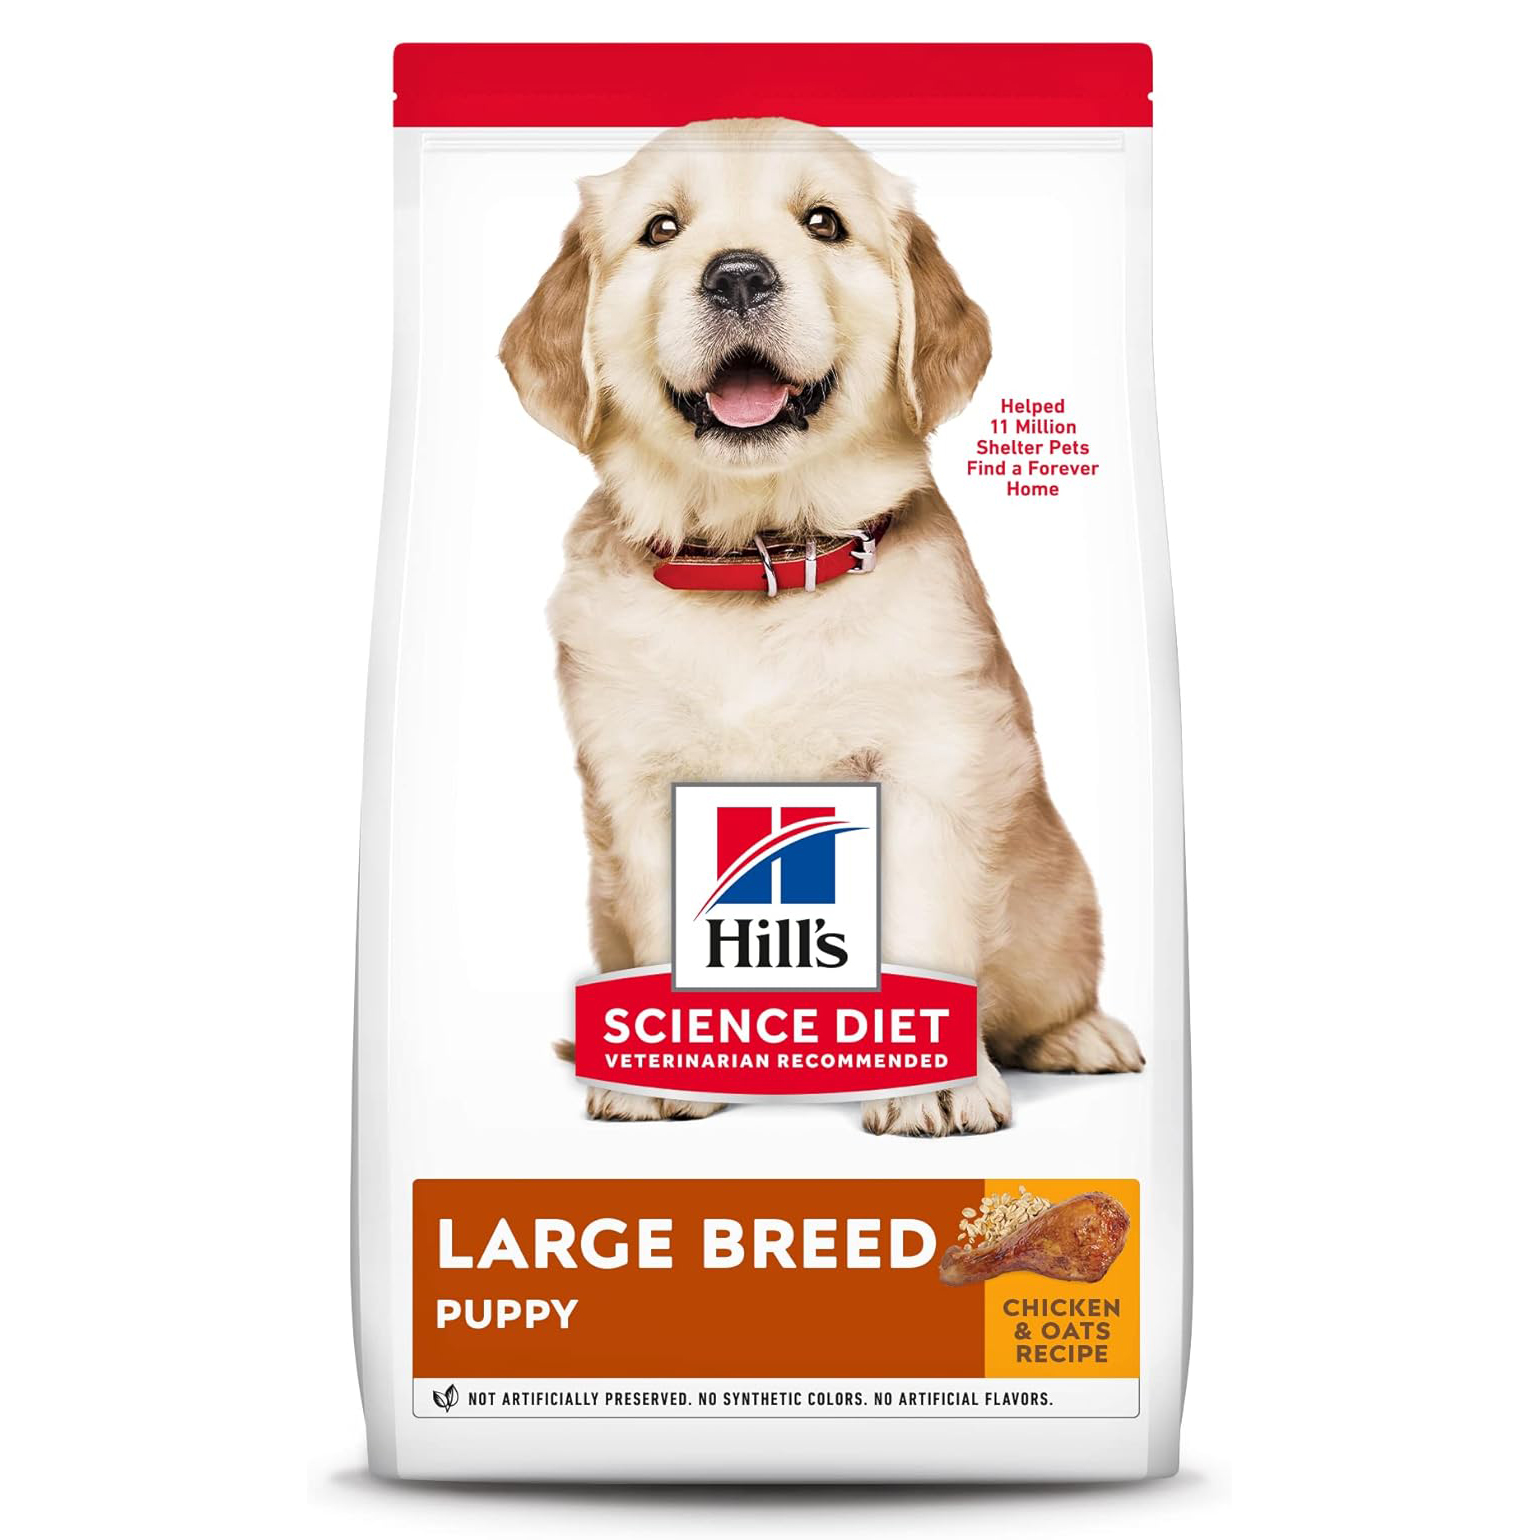 Hill’s Science Diet Puppy Large Breed Chicken Food